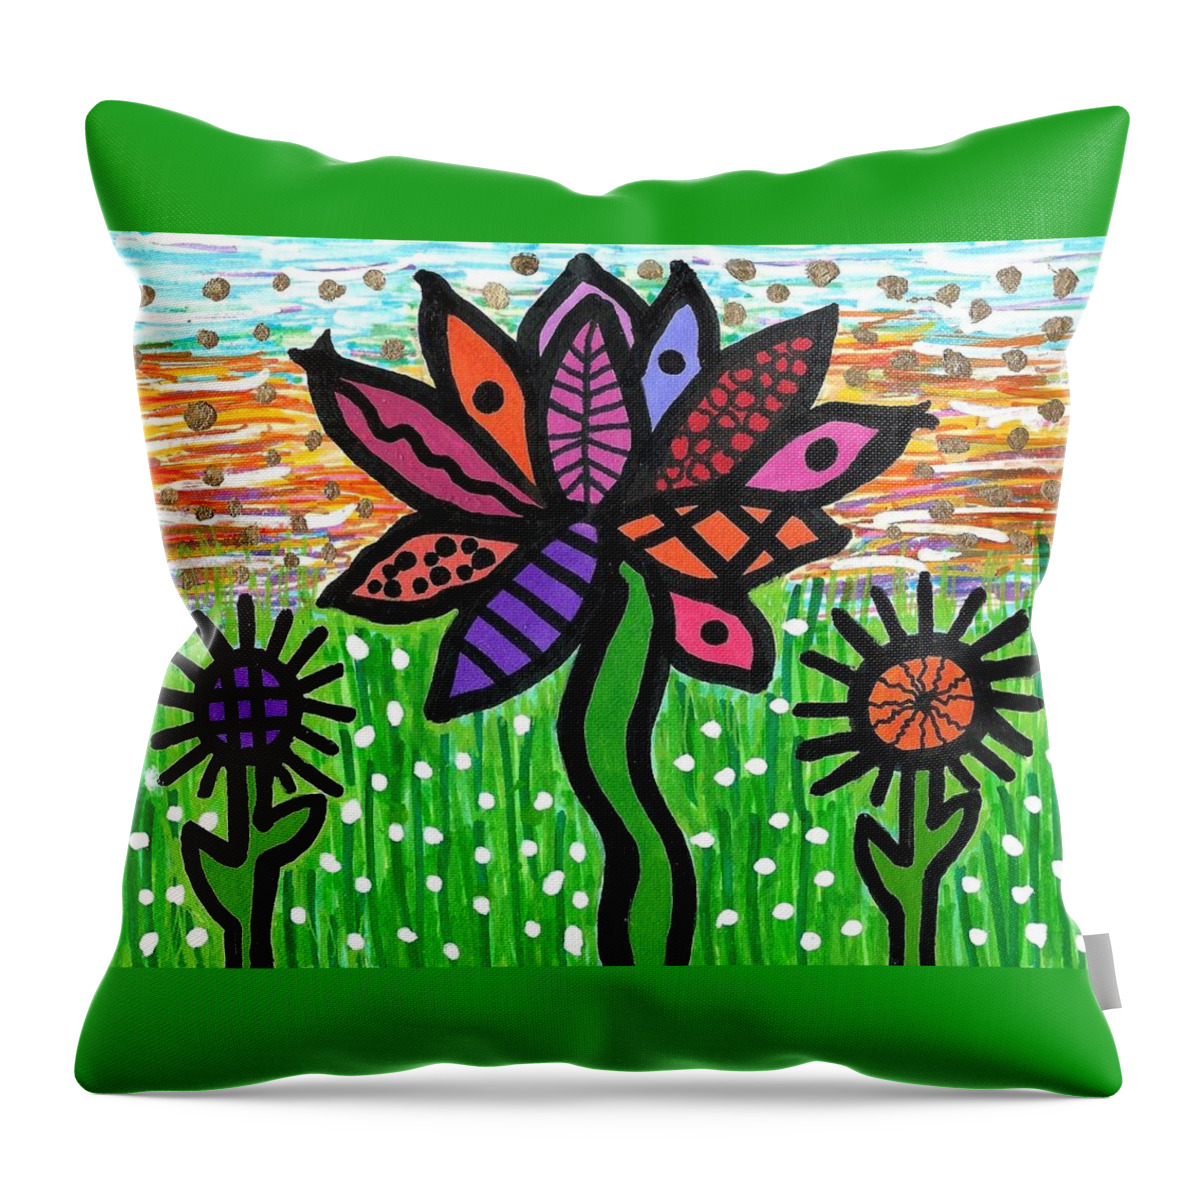 Original Art Throw Pillow featuring the drawing Funky Flowers At Sunset by Susan Schanerman